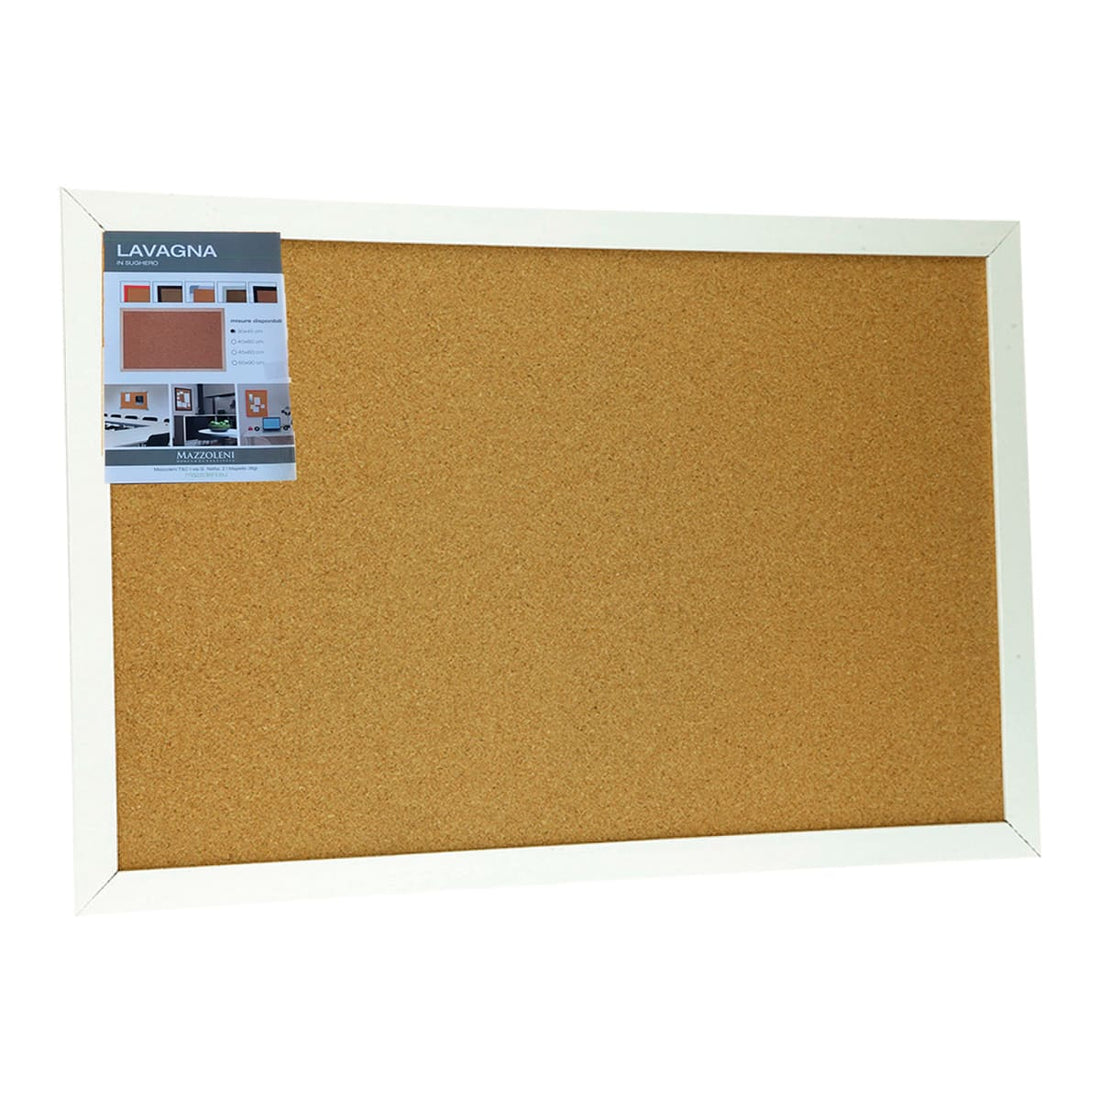 45X60 CORK NOTICE BOARD WITH WHITE WOODEN FRAME